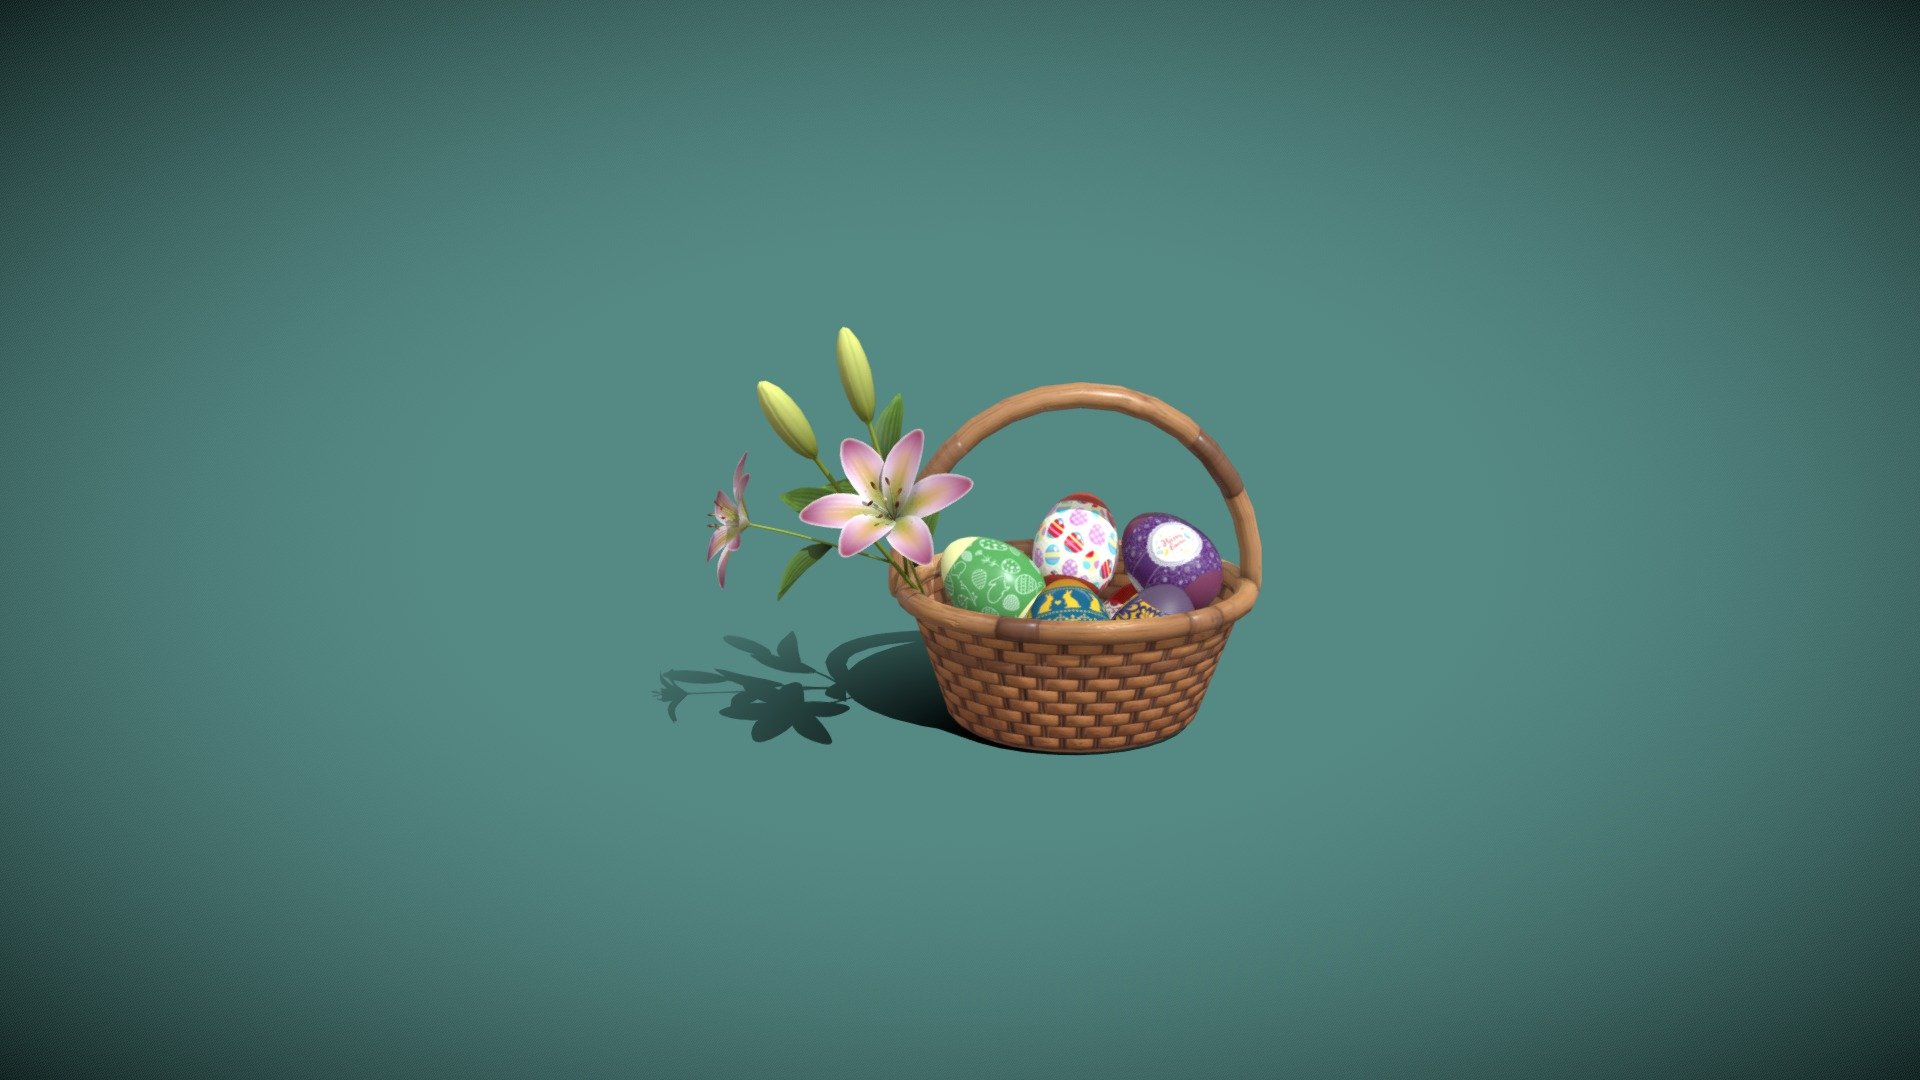 Easter Basket 3D Model  is completely ready to be used in your games, animations, films, designs etc. It includes separate models:




Wooden Wicker Basket

Easter Eggs

Lily 3D

All textures and materials are included and mapped in every format. The model is completely ready for use visualization in any 3d software and engine.

Technical details:




A transparency map is included for the glass material. White color is glass, black is nonglass(can be inverted if needed).

File formats included in the package are: FBX, OBJ, ABC, PLY, STL, x3d, BLEND, gLTF (generated), USDZ (generated)

Native software file format: BLEND

Polygons: 5,343

Vertices: 5,458

Textures: Color, Metallic, Roughness, Normal, AO.

All textures are 2k resolution.
 - Easter Basket 3D Model - Buy Royalty Free 3D model by 3DDisco 3d model